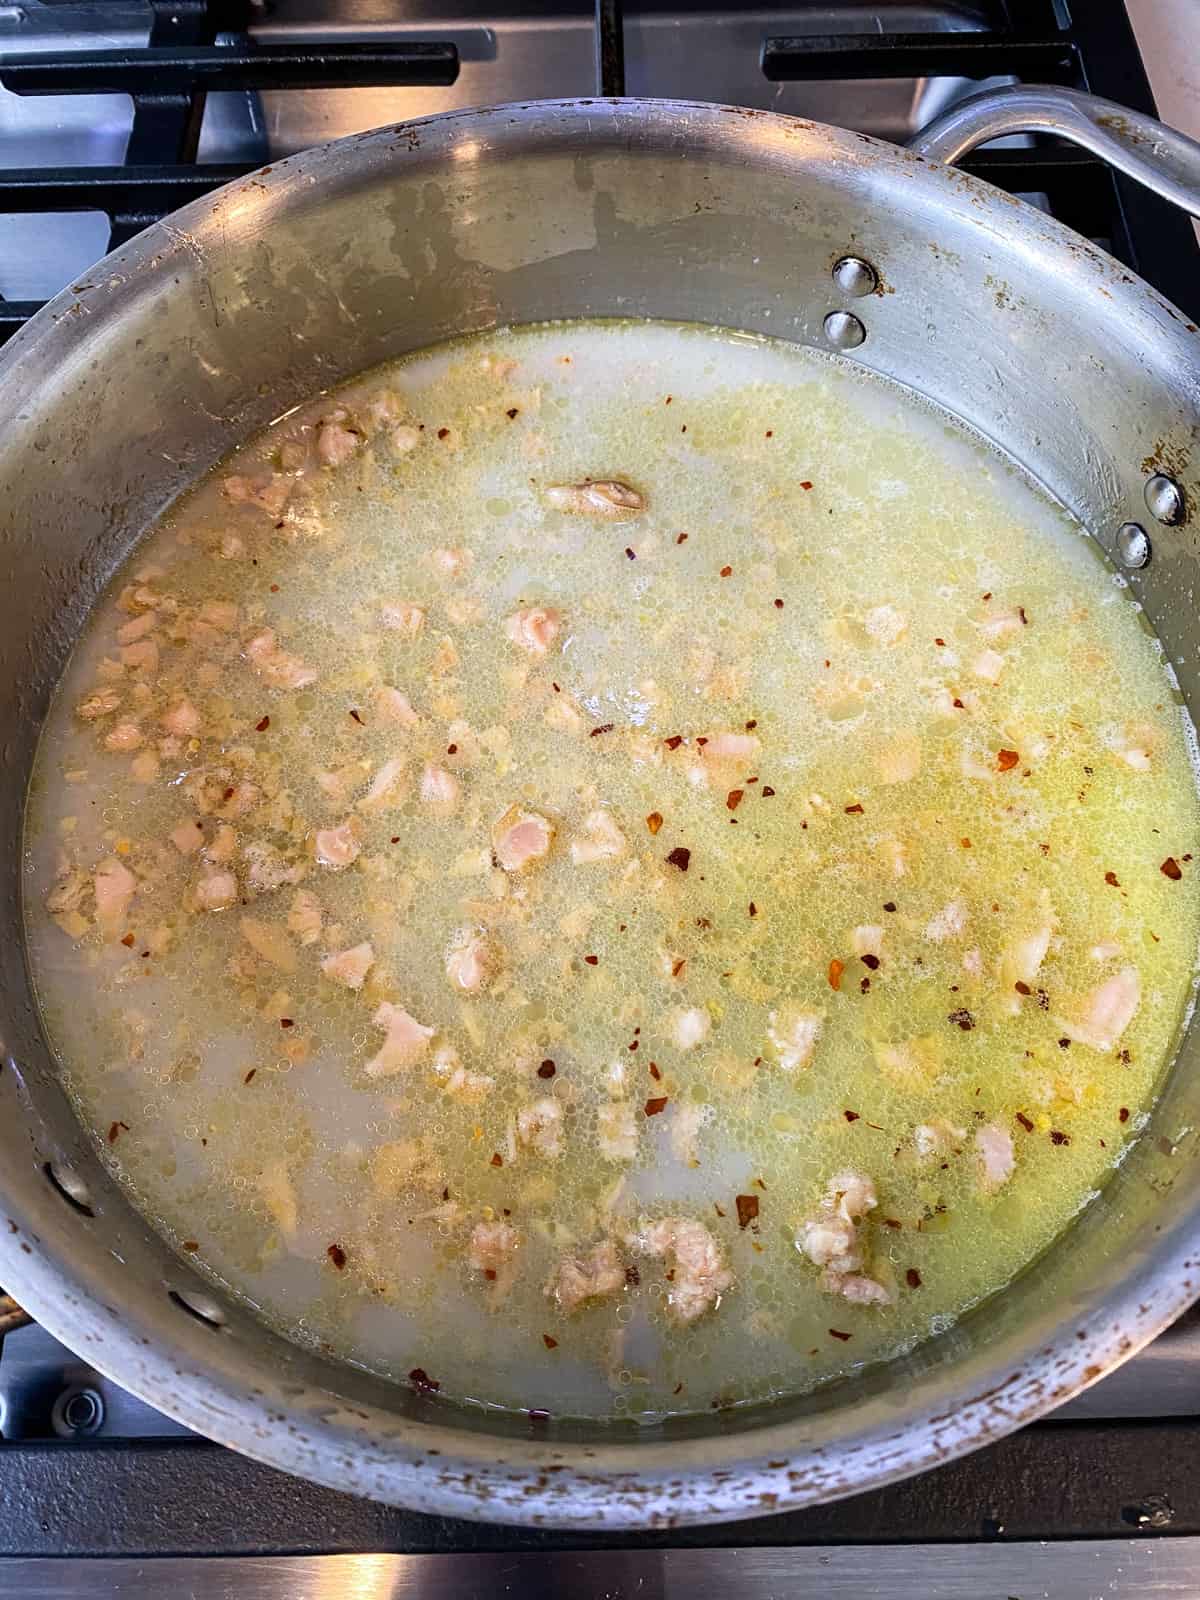 Add the canned clams with all their juices and the wien wine and simmer for a few minutes to cook off the wine.